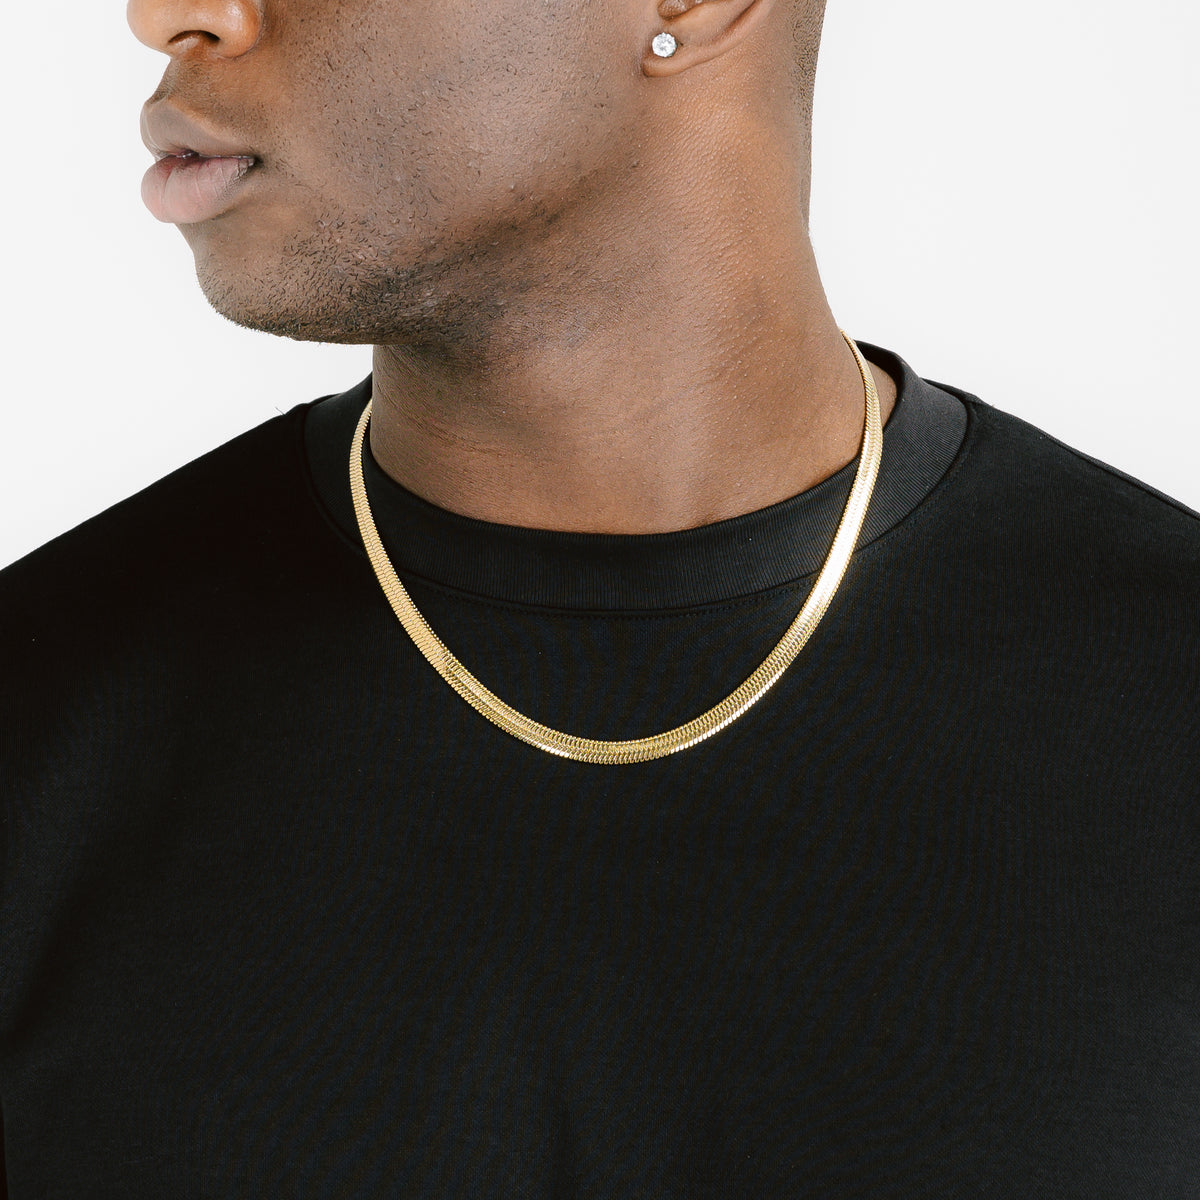 14K GOLD PLATED HERRINGBONE CHAIN NECKLACE(20